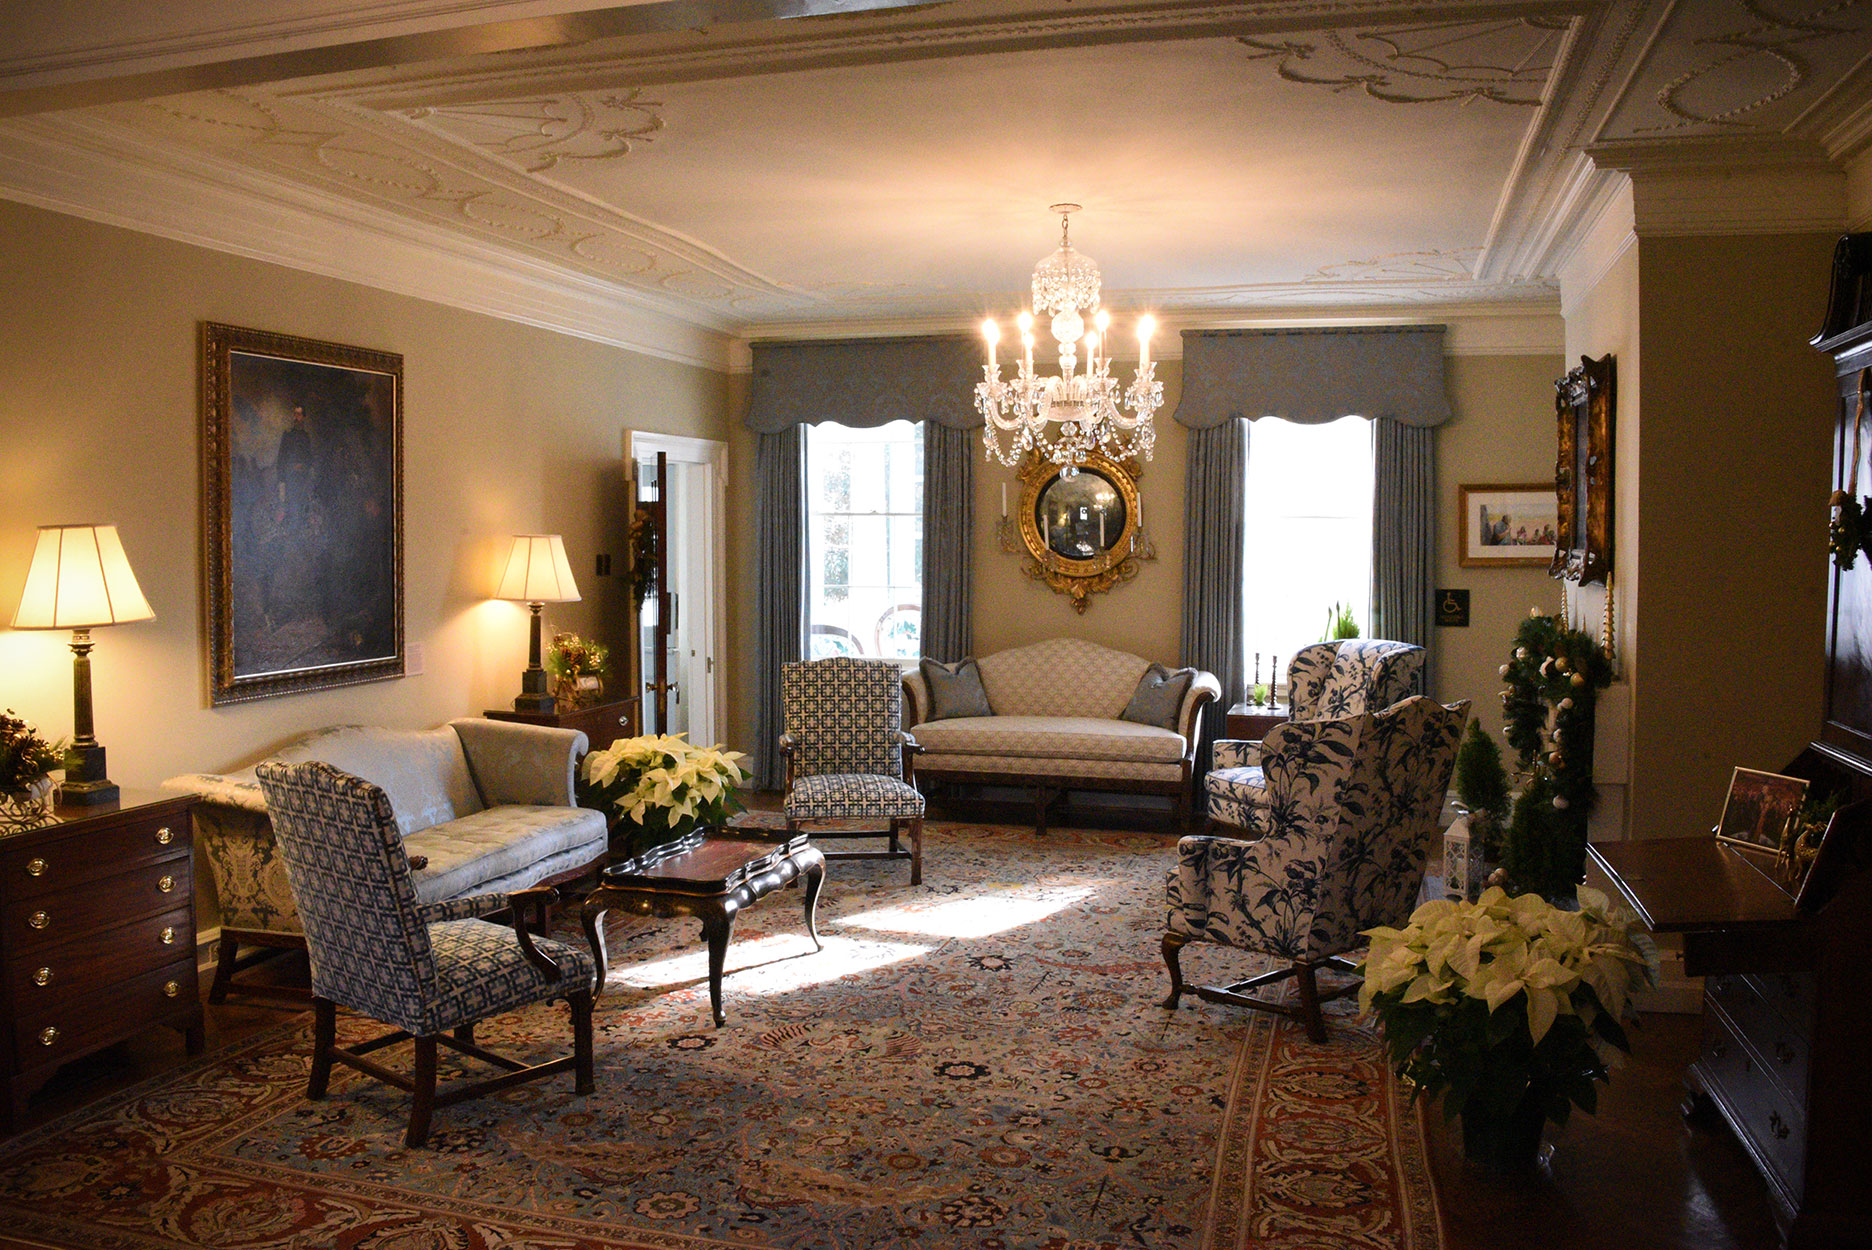 Sunlight pours through Parlor windows where Warren Garden Club graces the room with white poinsettias, gold and green seasonal decor. Elegant details, furniture and carpet fill the room.